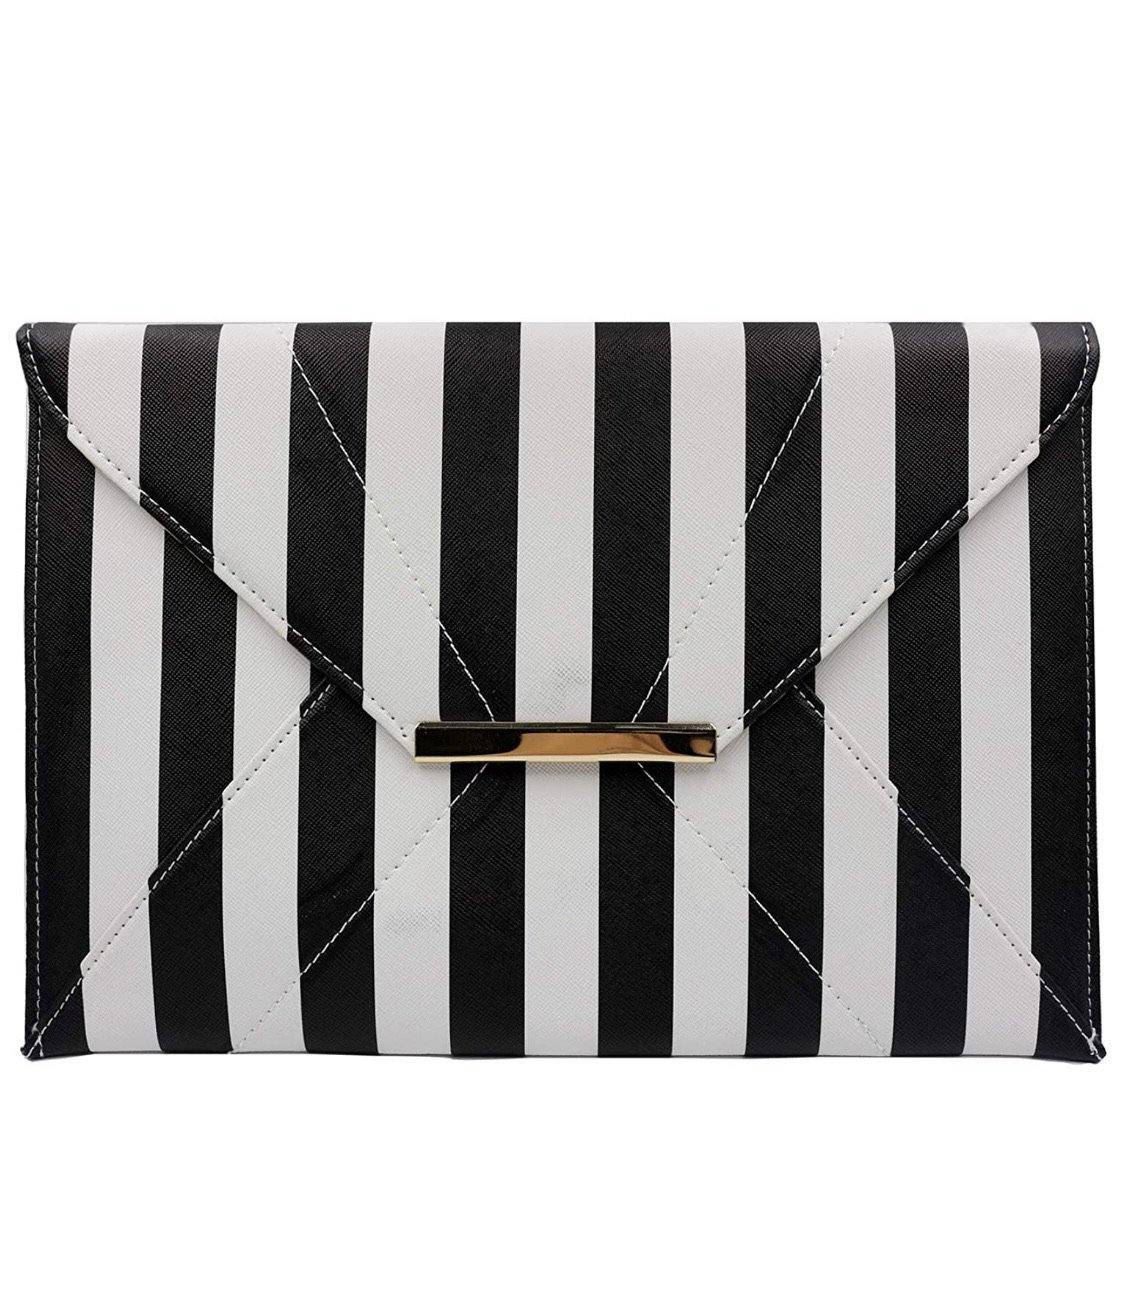 Black And White Striped Bag | ShopStyle